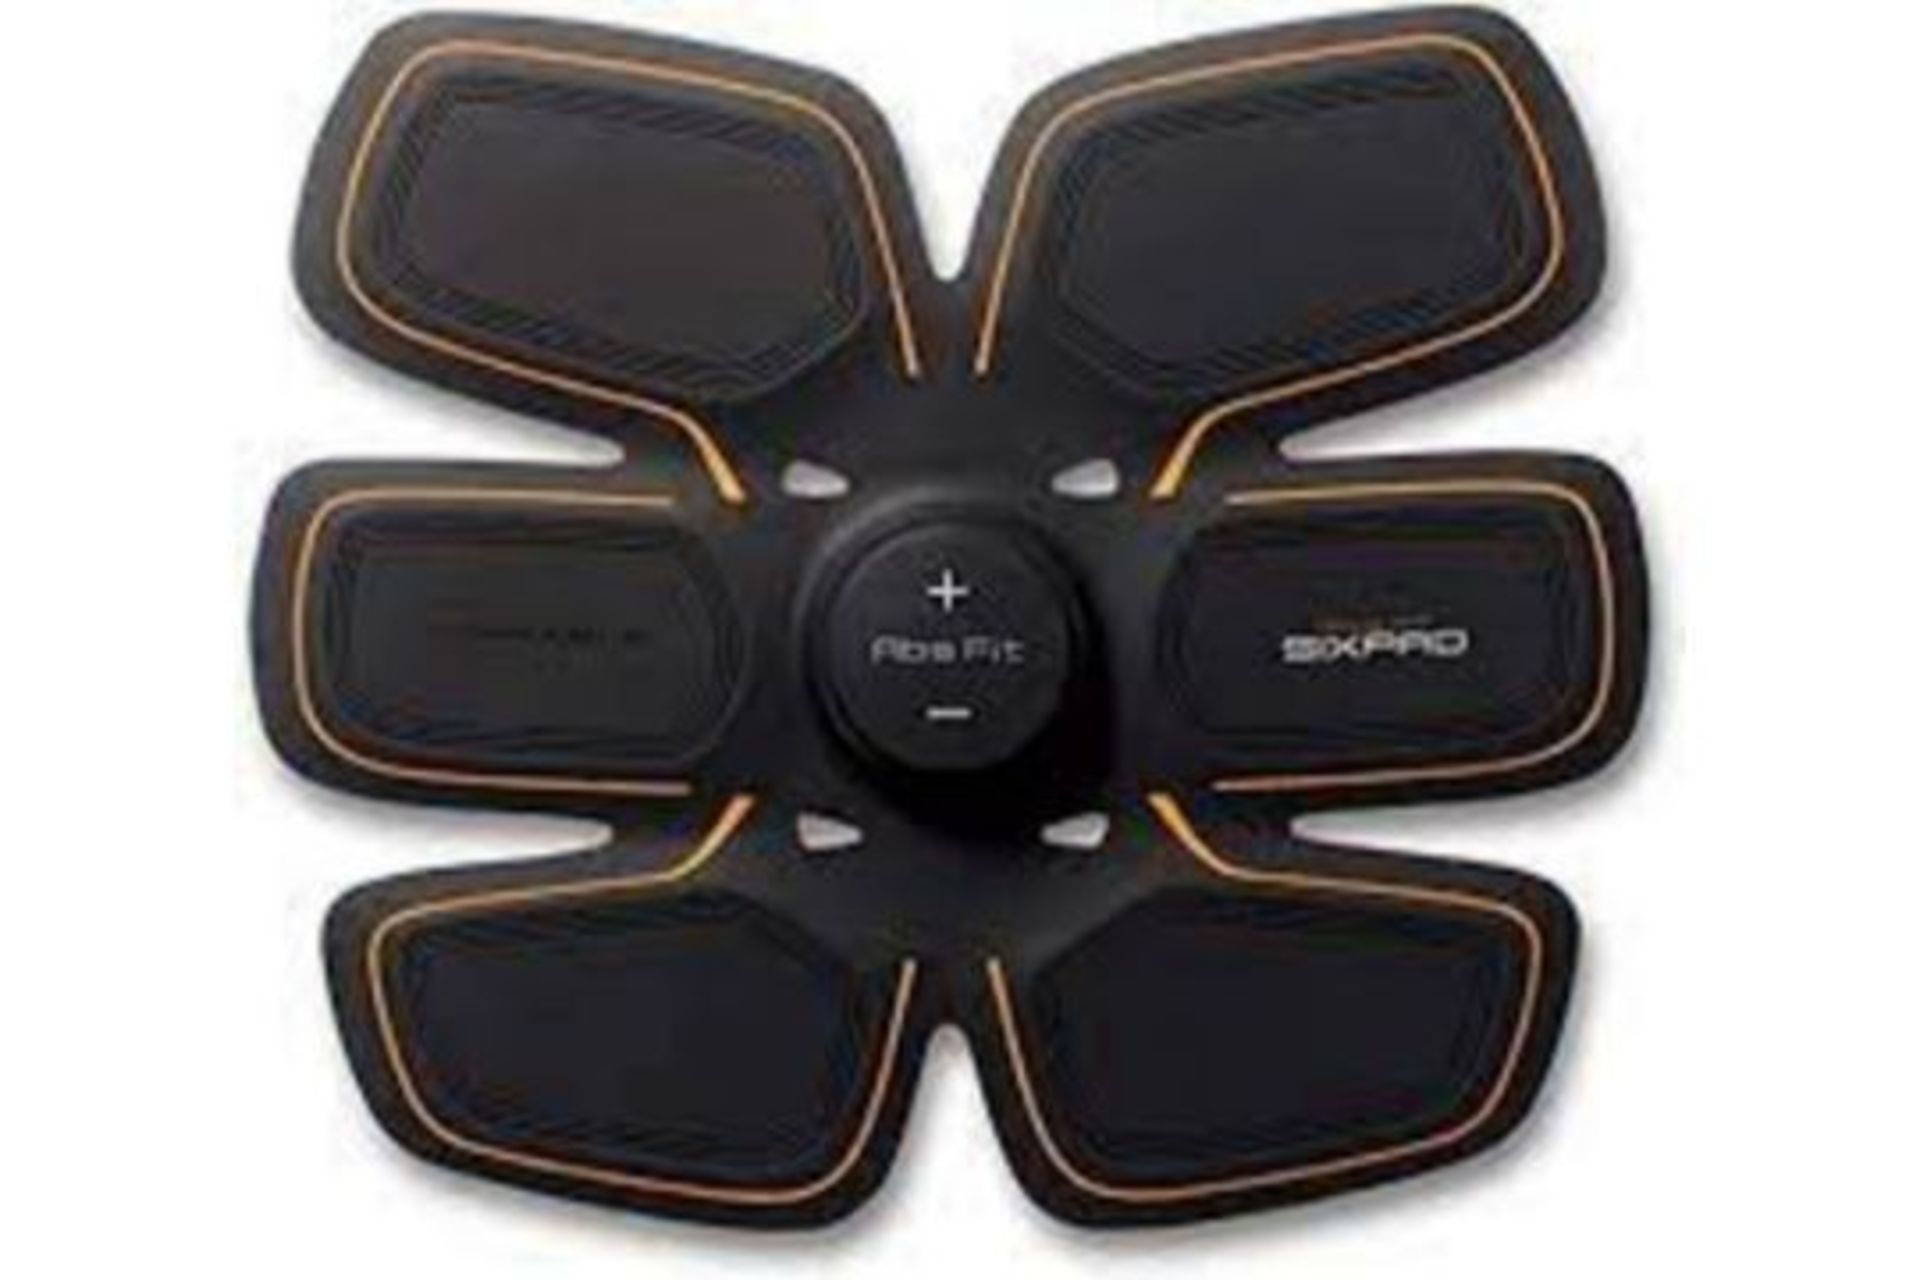 NEW BOXED TRAINING GEAR SIXPAD ABS FIT 2 ELECTRONIC MUSCLE STIMULATOR RRP £230 (S1)